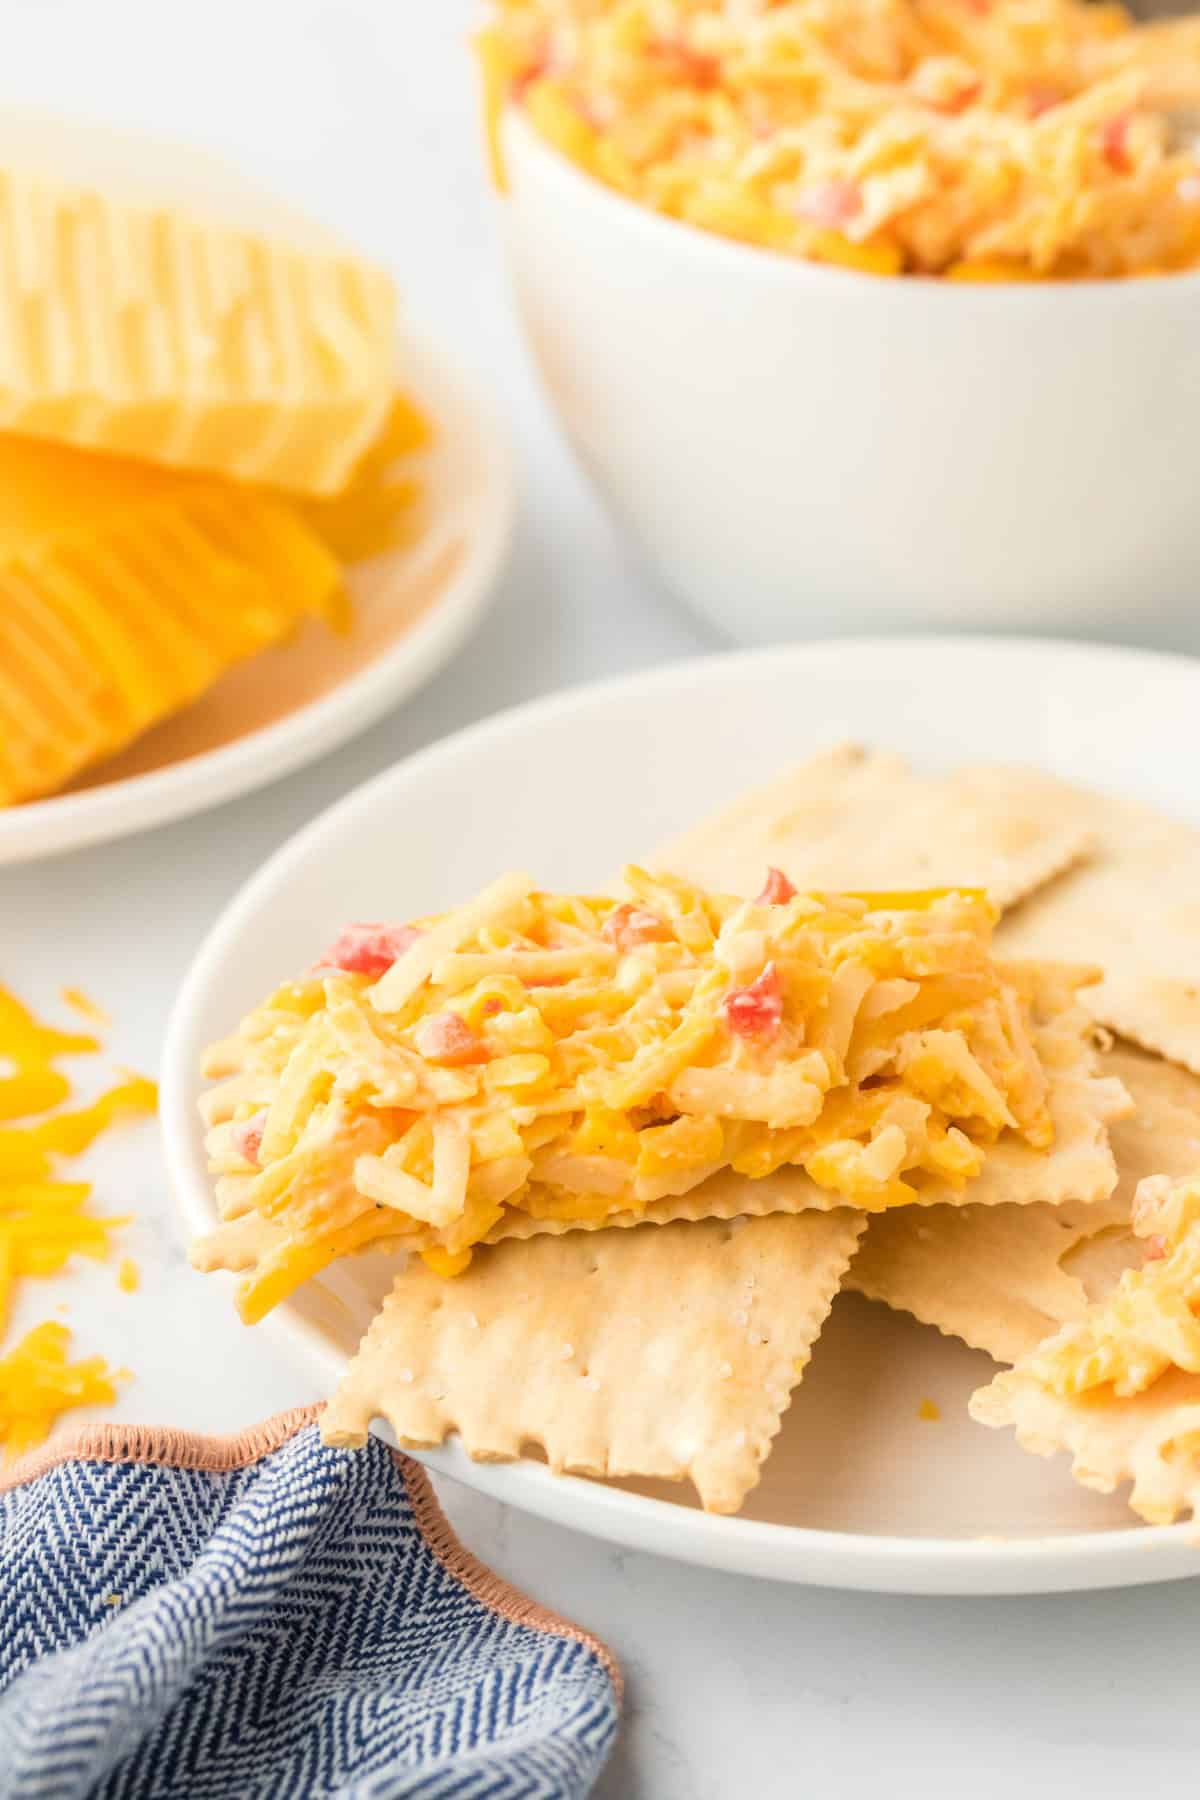 Pimento cheese spread on crackers before eating